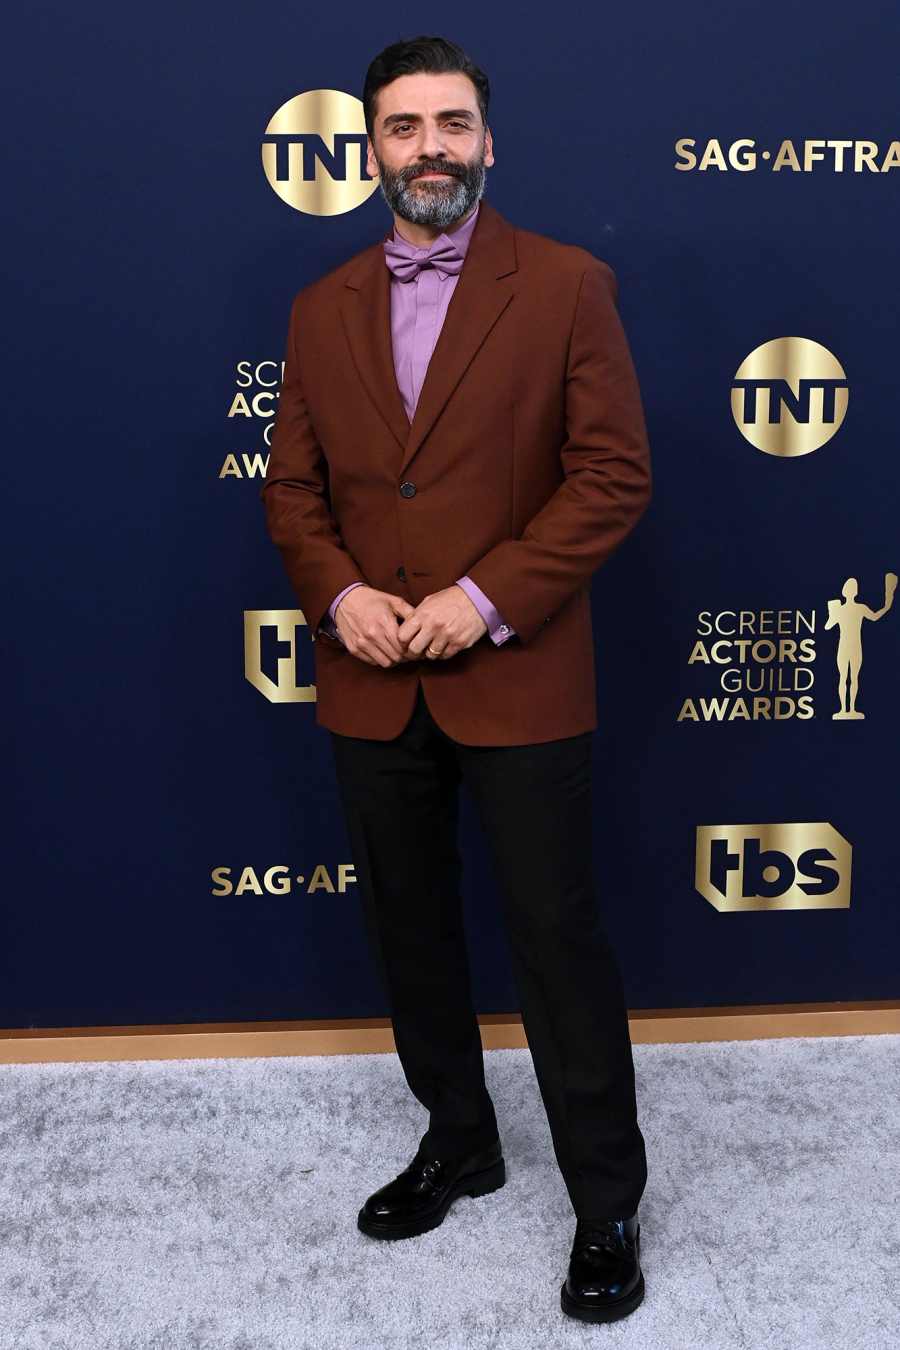 Oscar Isaac The Best Dressed Hottest Men at the 2022 SAG Awards